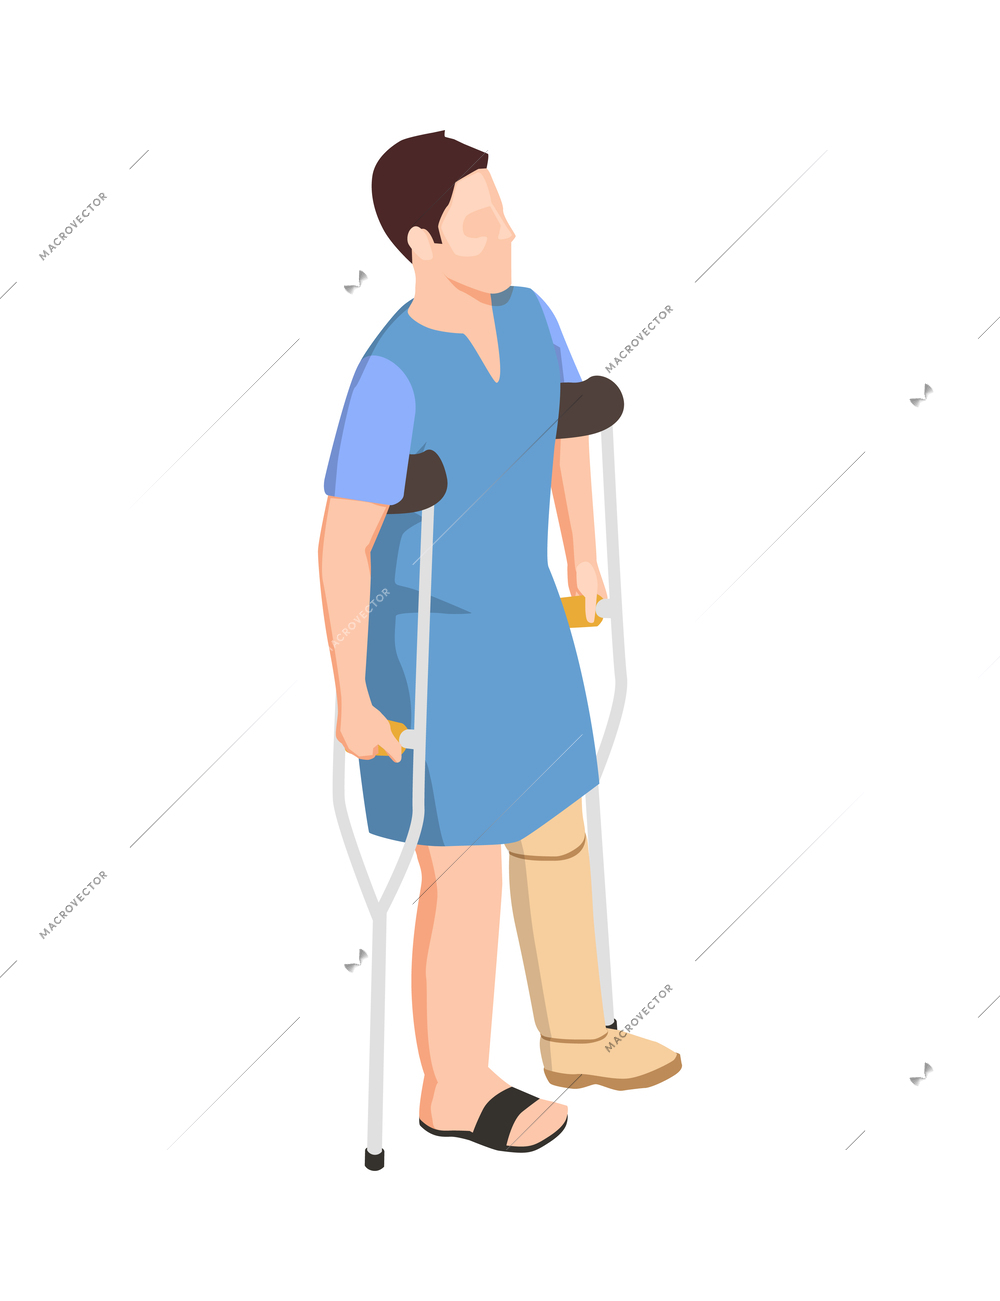 Male patient with crutches during rehabilitation period isometric icon vector illustration